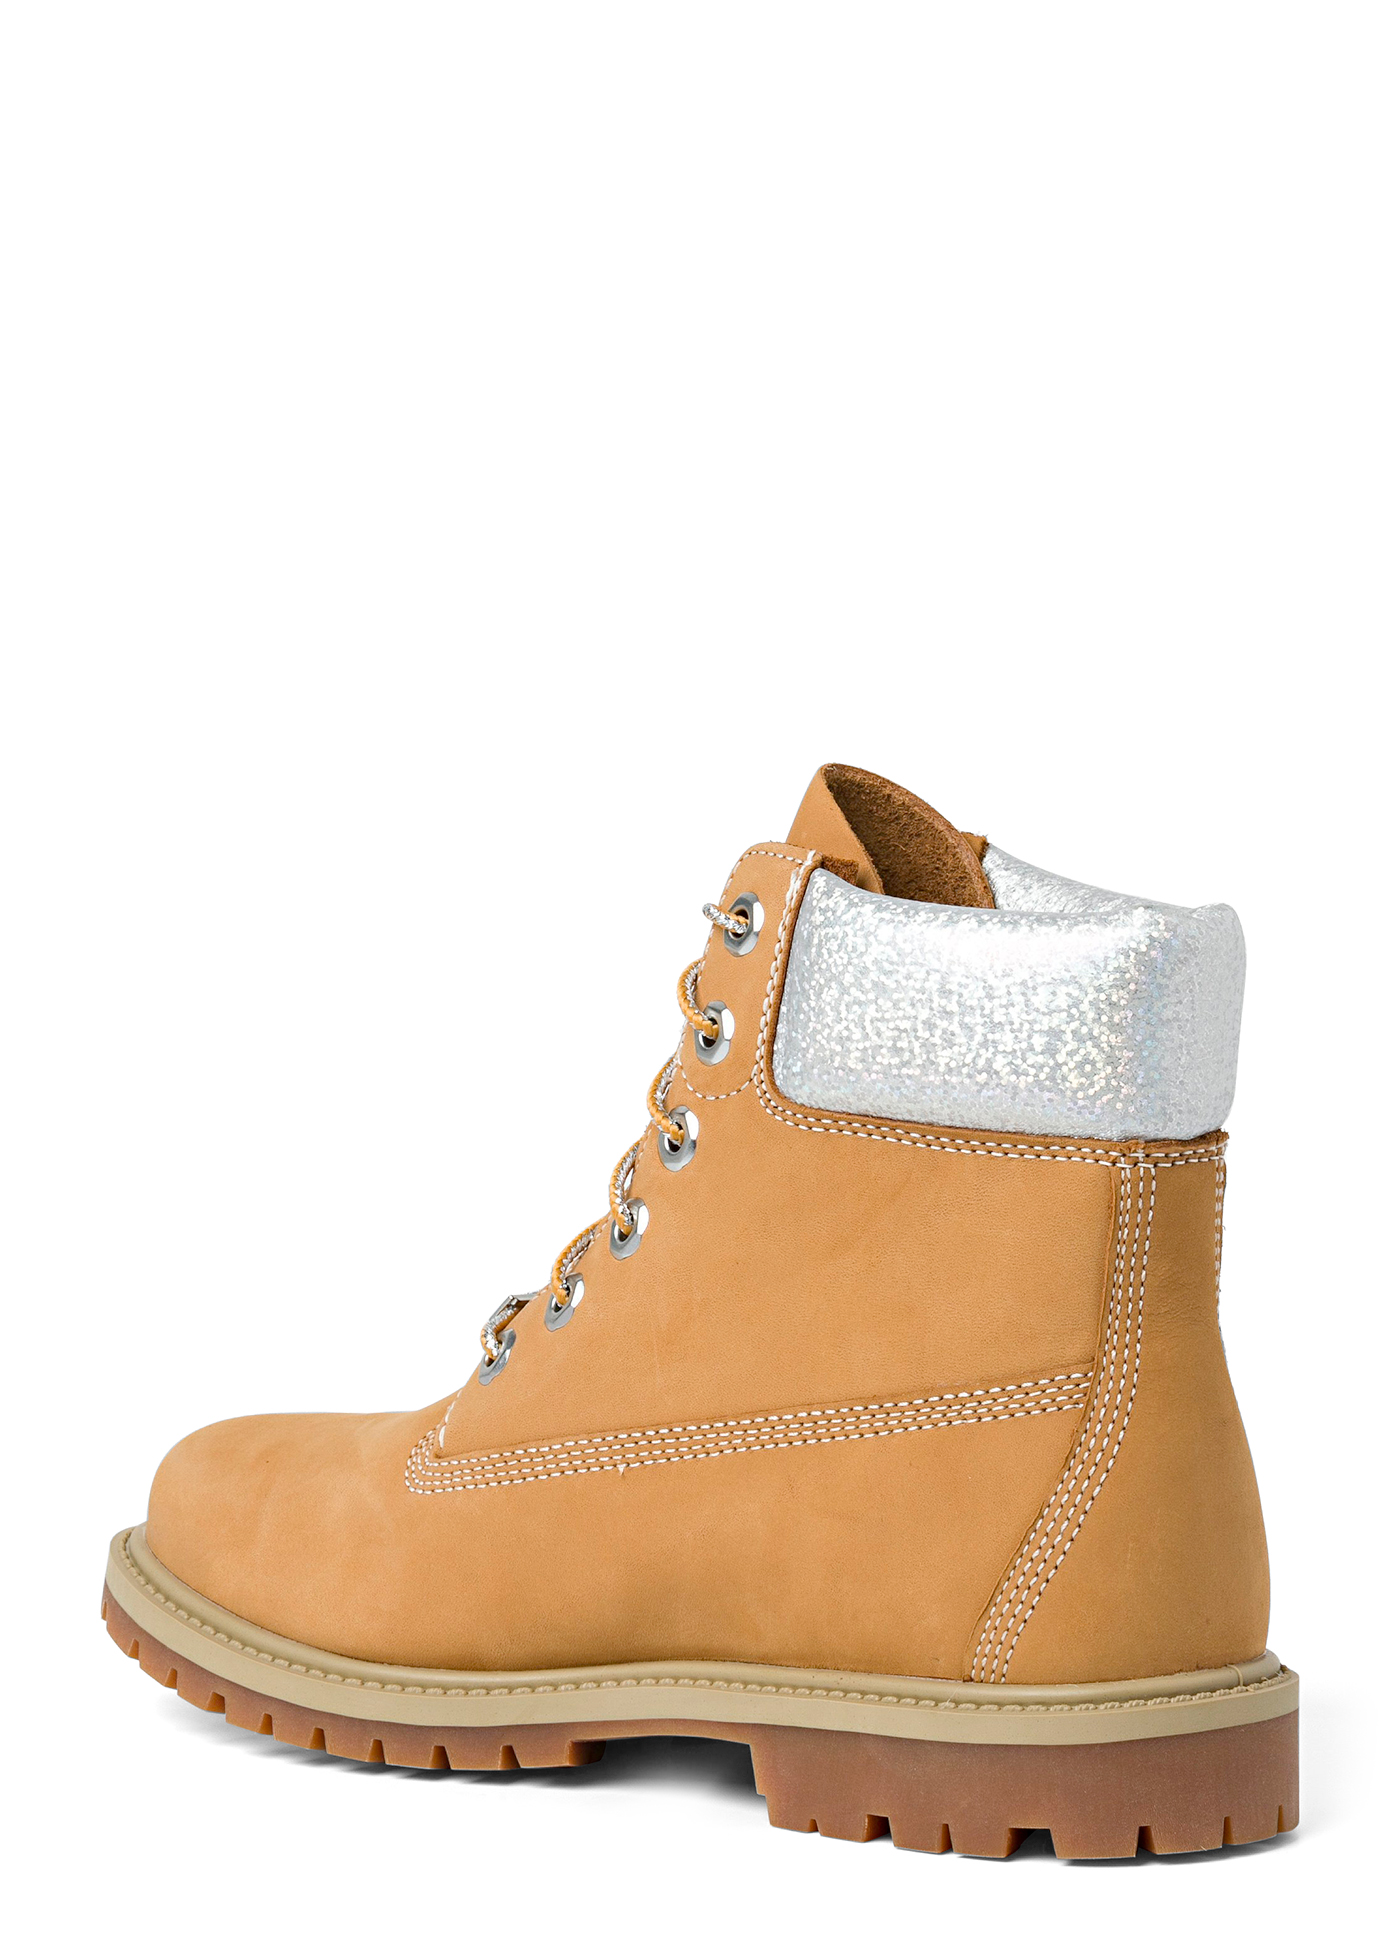 6in Heritage Boot Cupsole - WHEAT NUBUK image number 1